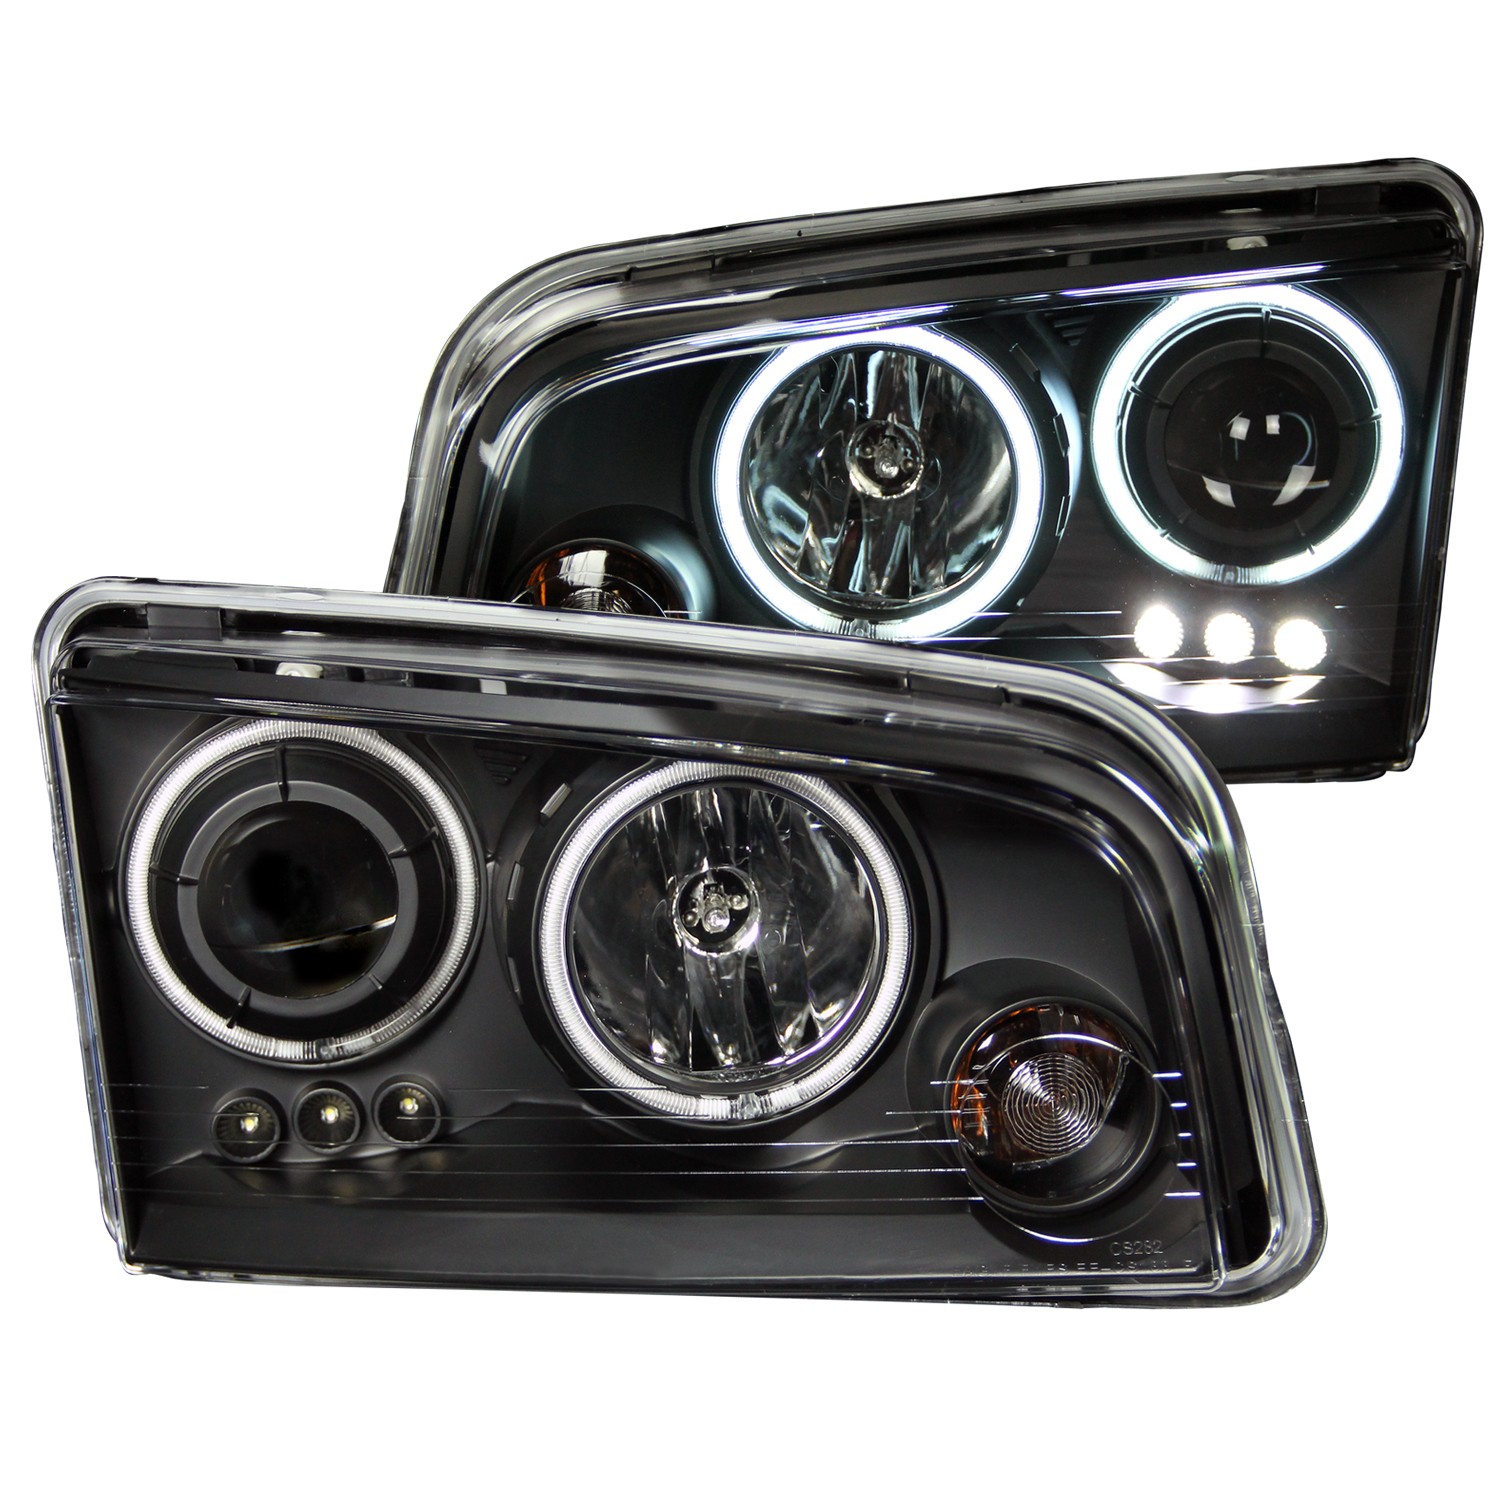 2006-2010 Dodge Charger ANZO Project Halo Head Lights w/Halogen Bulbs, Clear Lens & Black Housing (CCFL)